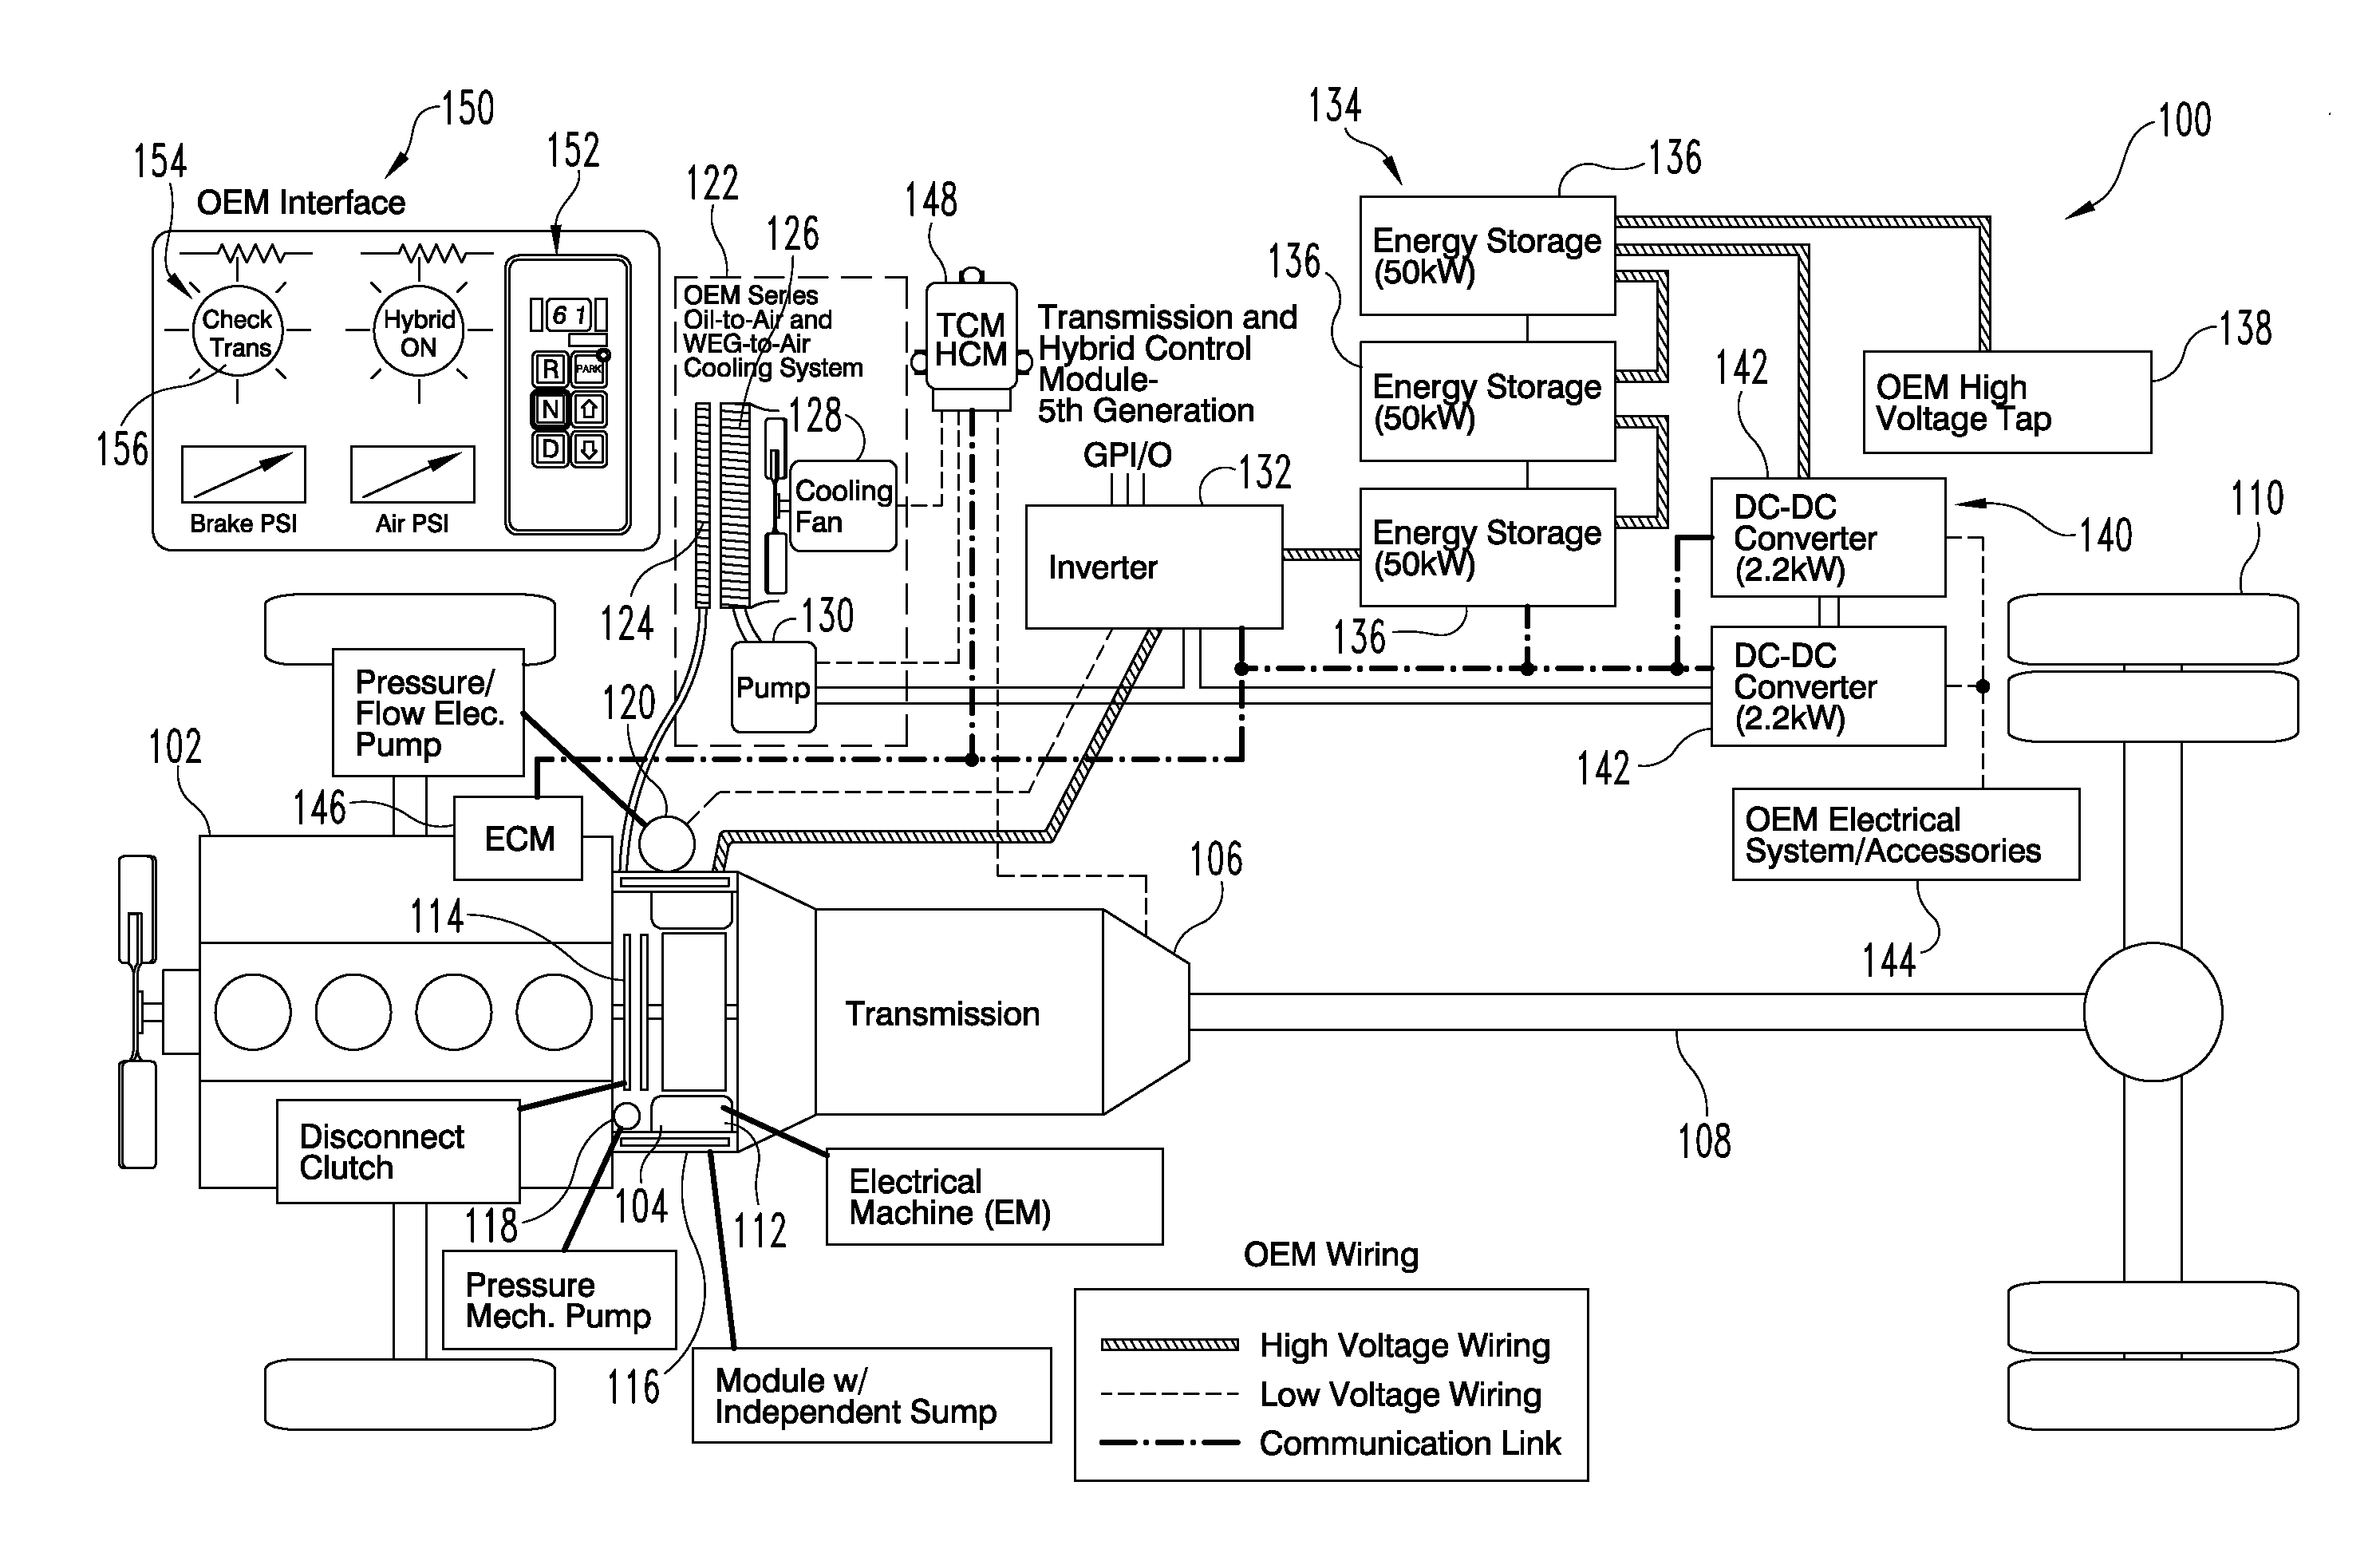 Service disconnect interlock system and method for hybrid vehicles